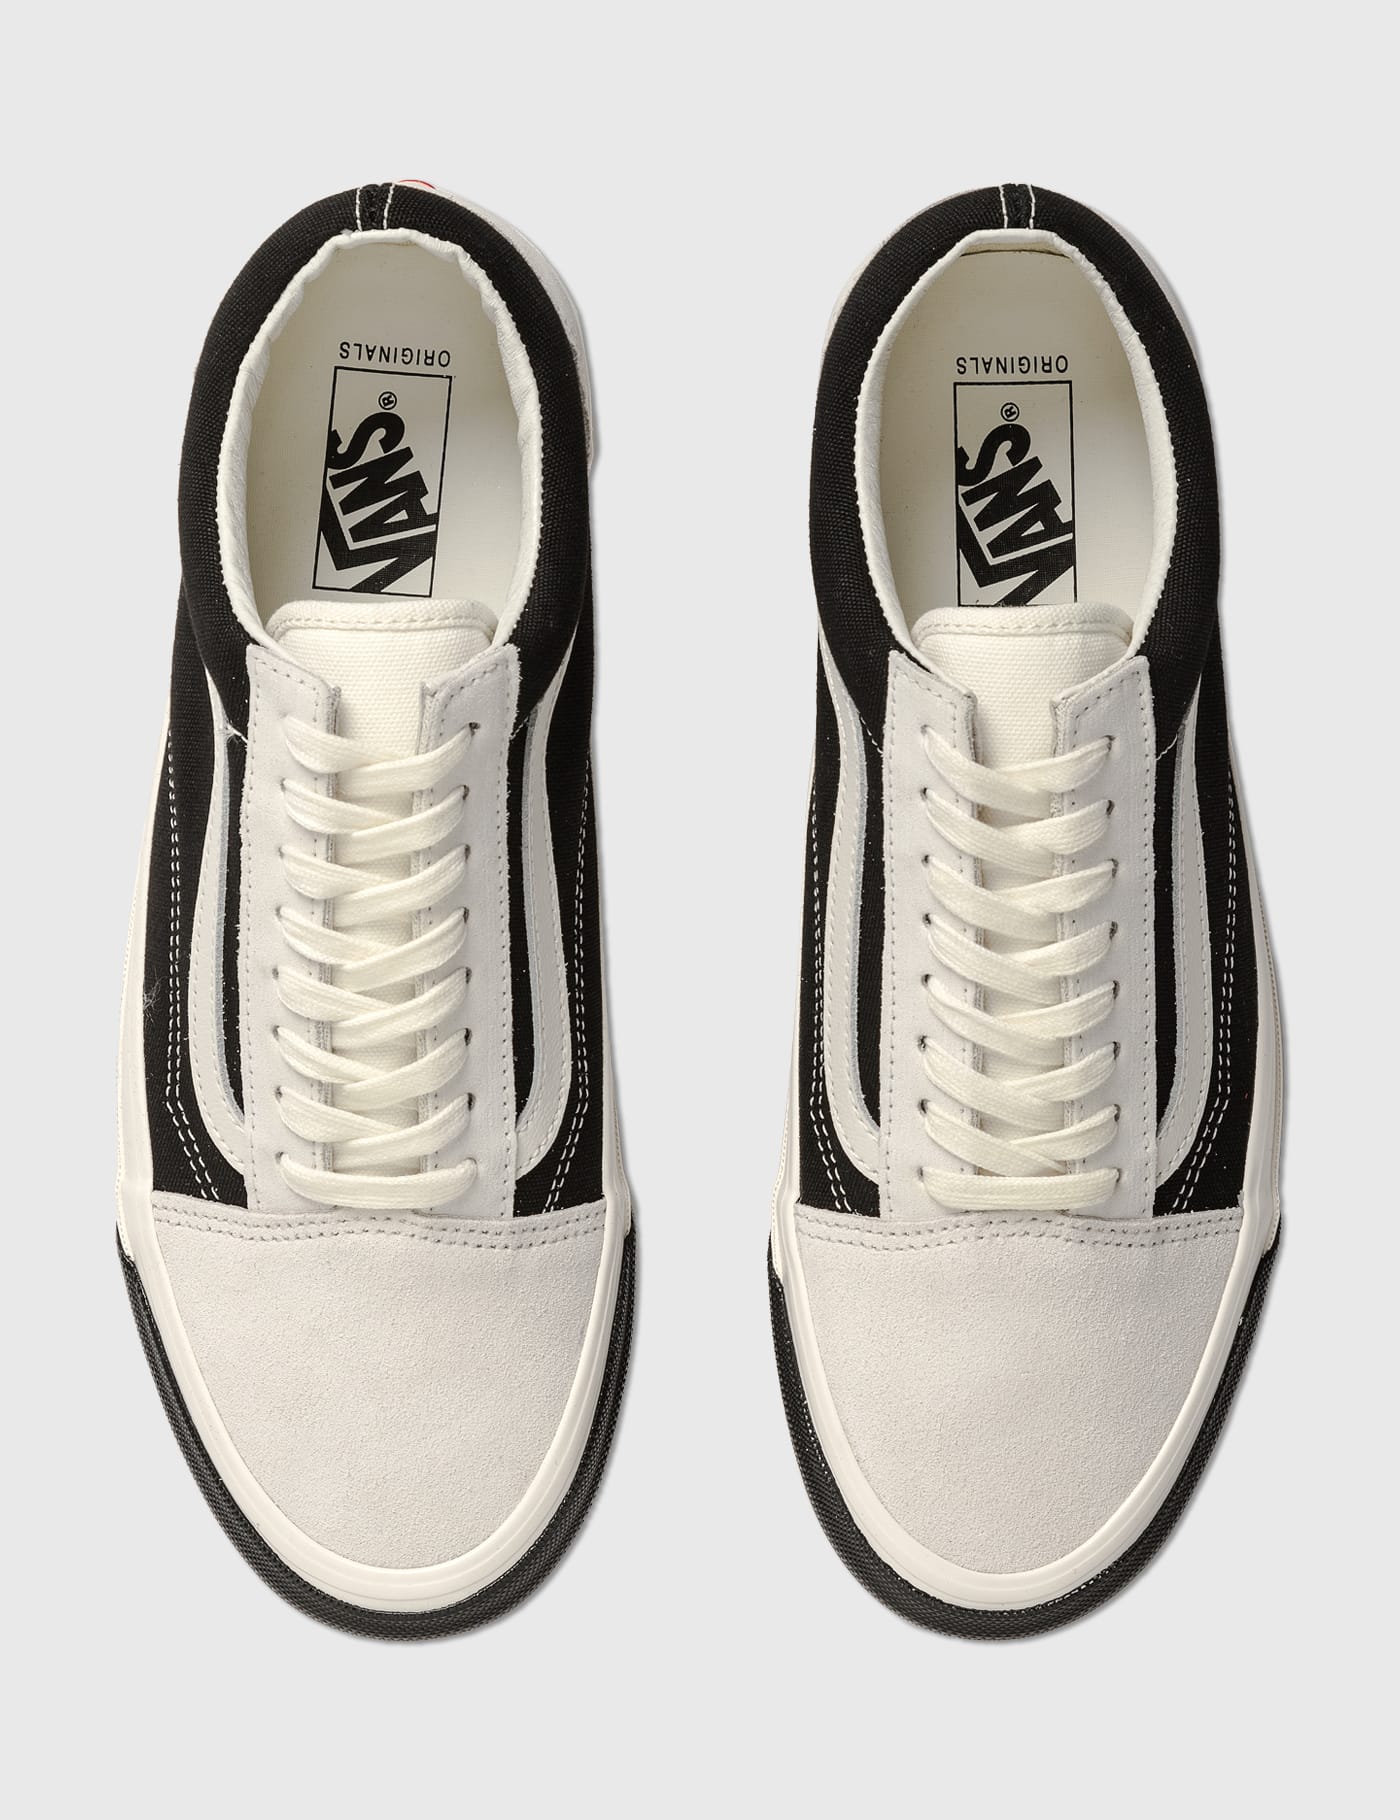 Vans - OG Old Skool LX | HBX - Globally Curated Fashion and Lifestyle by  Hypebeast